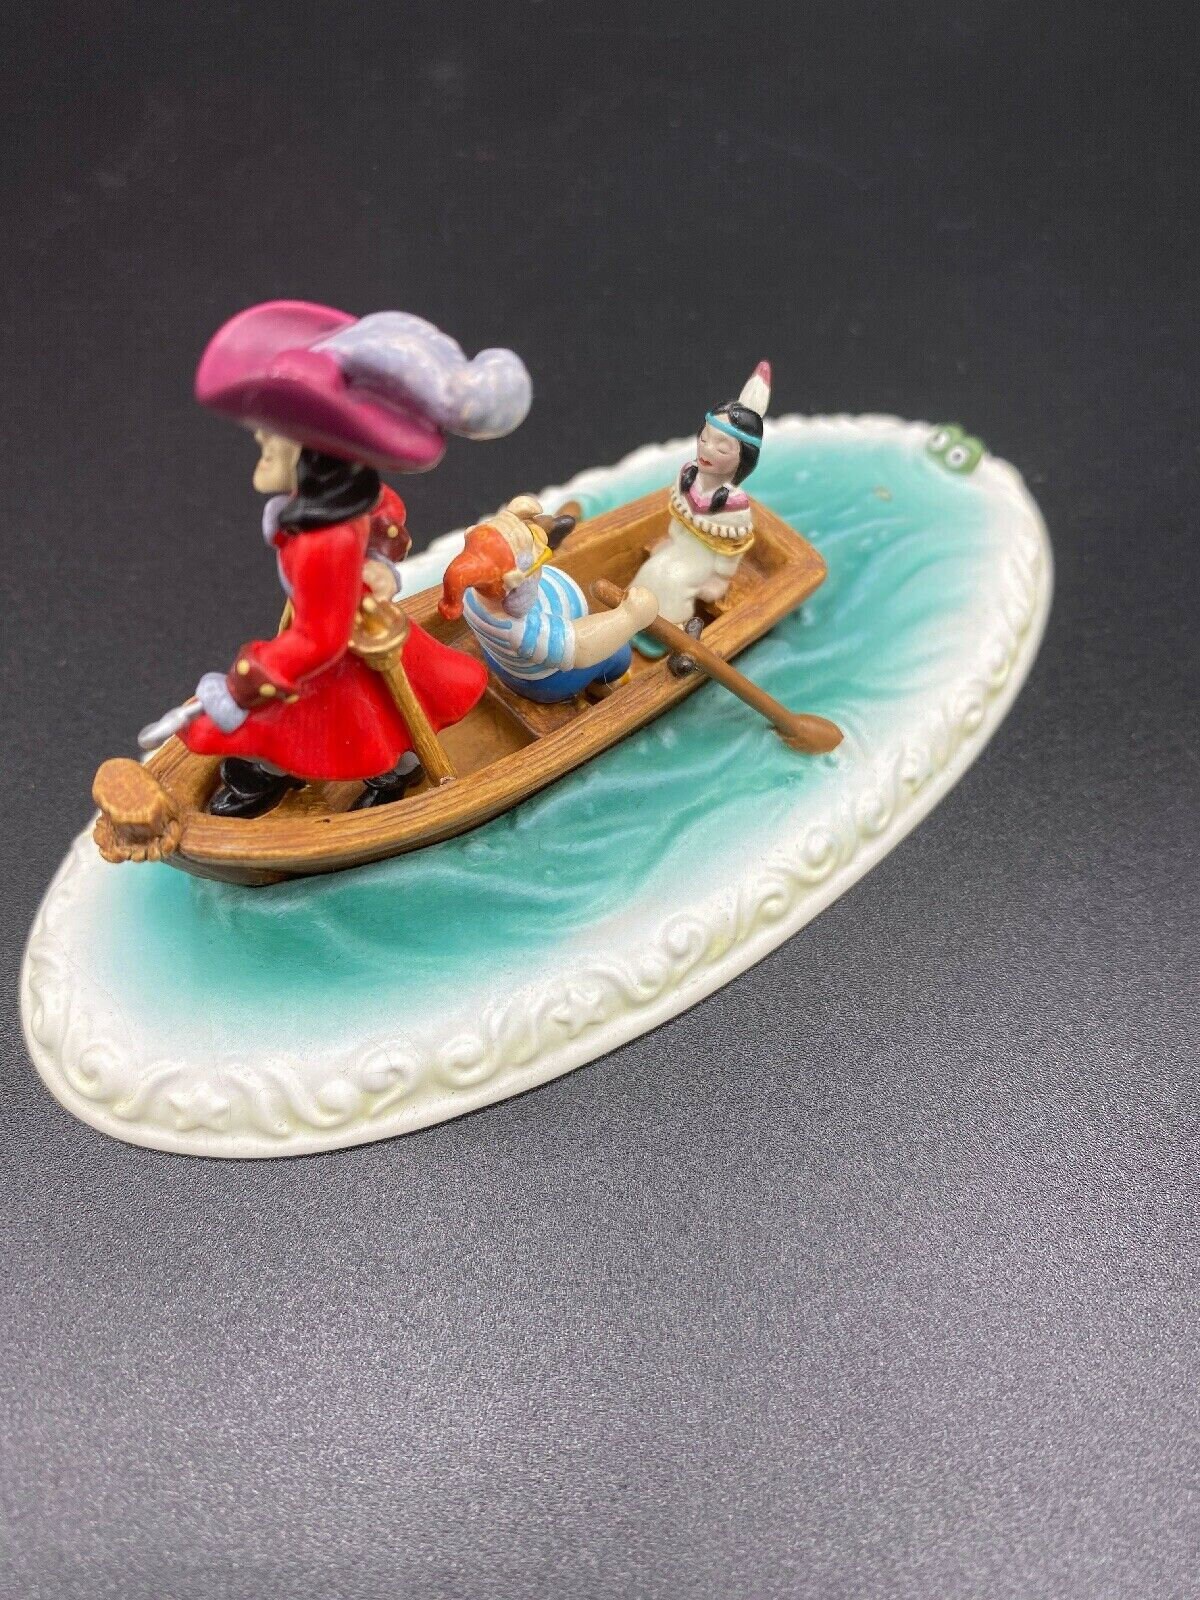 Disney Capitain Hook kidnapped, by OLSZEWSKI From Peter Pan 2001 Figurine -   Canada